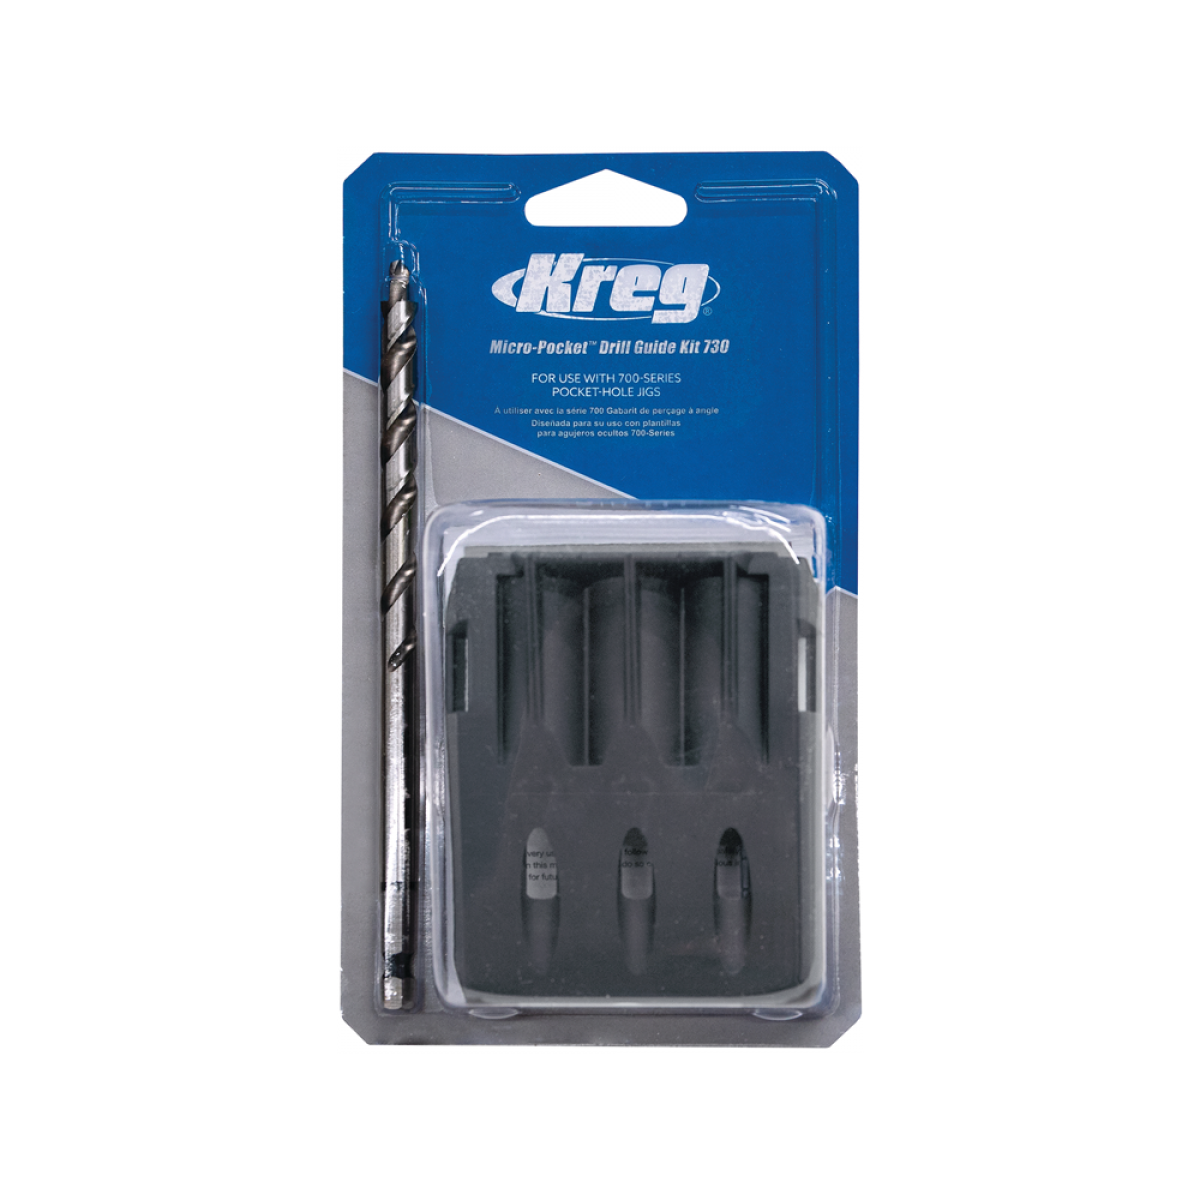 Kreg Micro-Pocket Drill Guide Kit 730 Power Tool Services